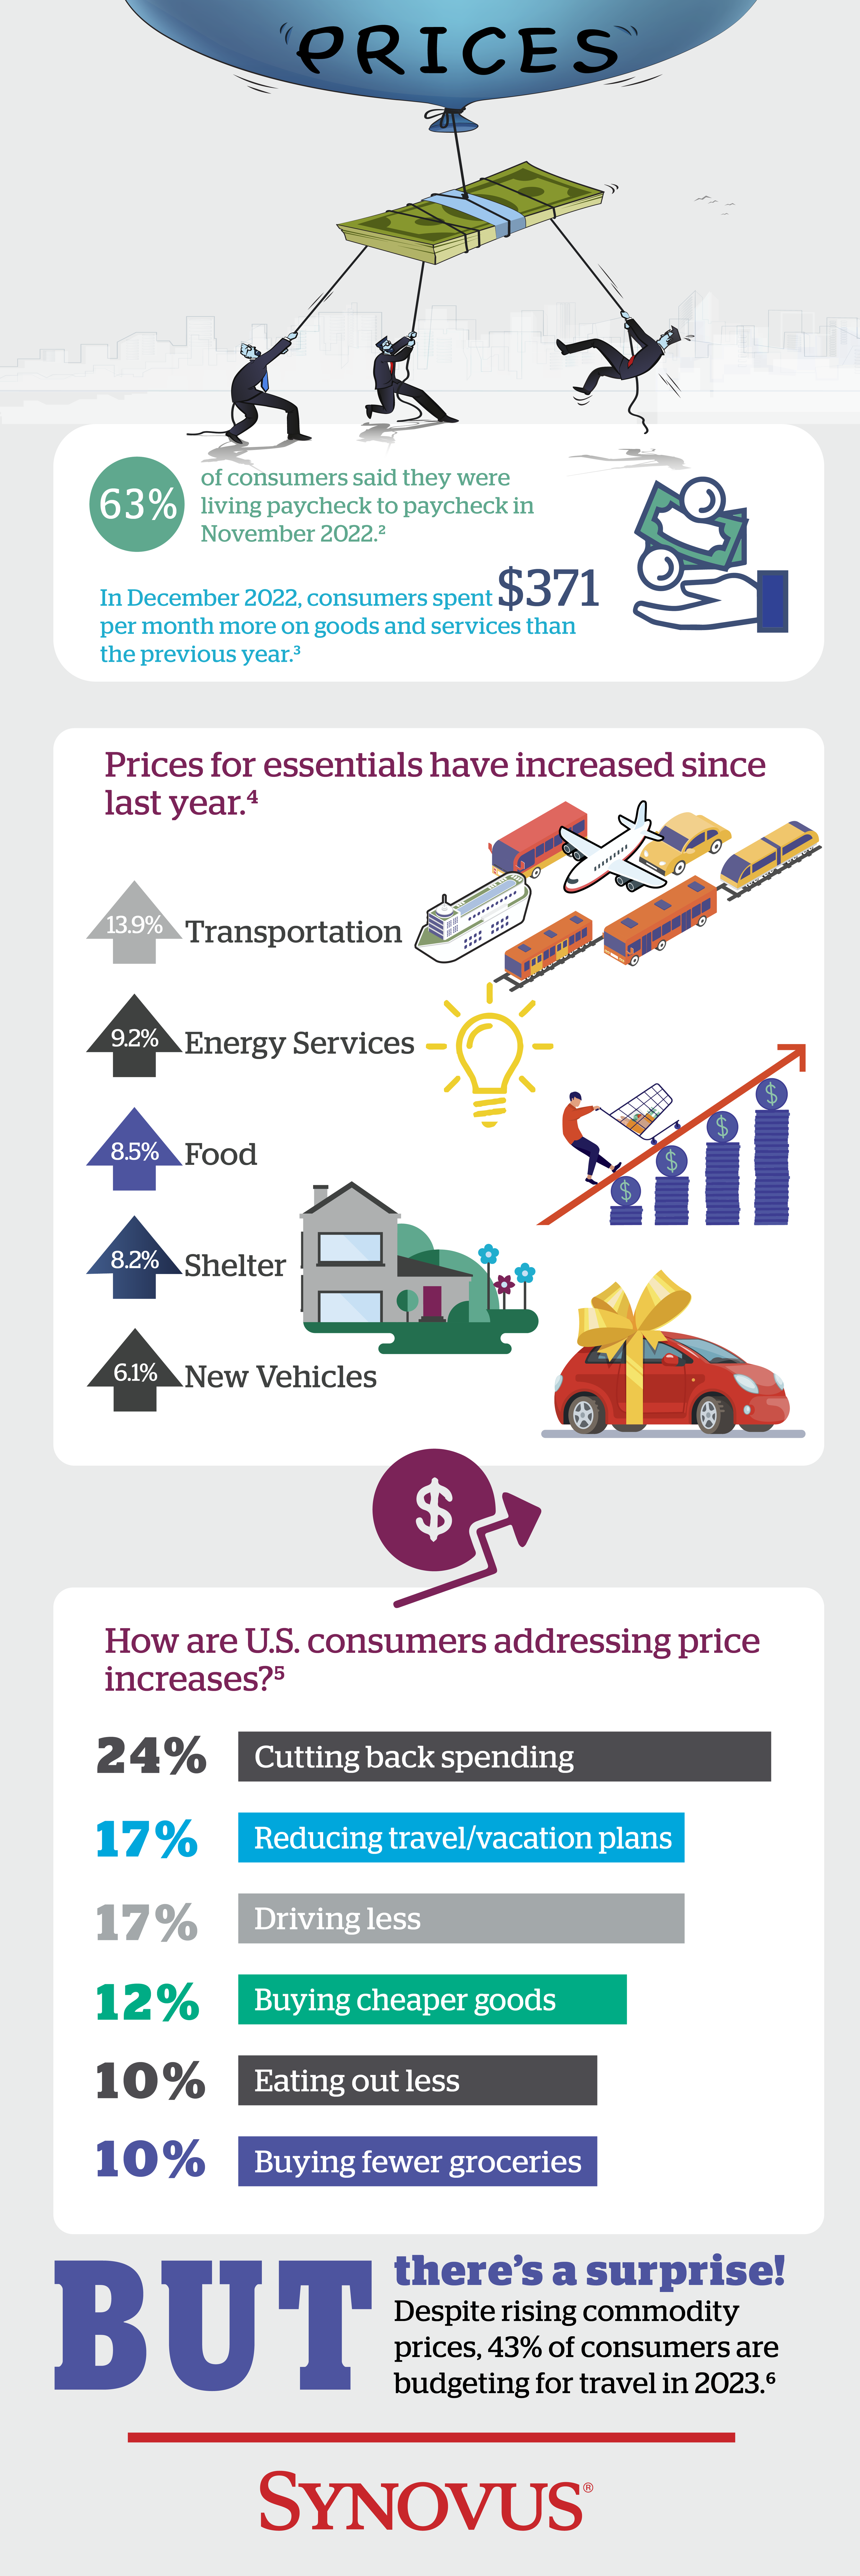 Infographic describing consumer spending under inflation pressure. A full description is available through a link beneath the image.